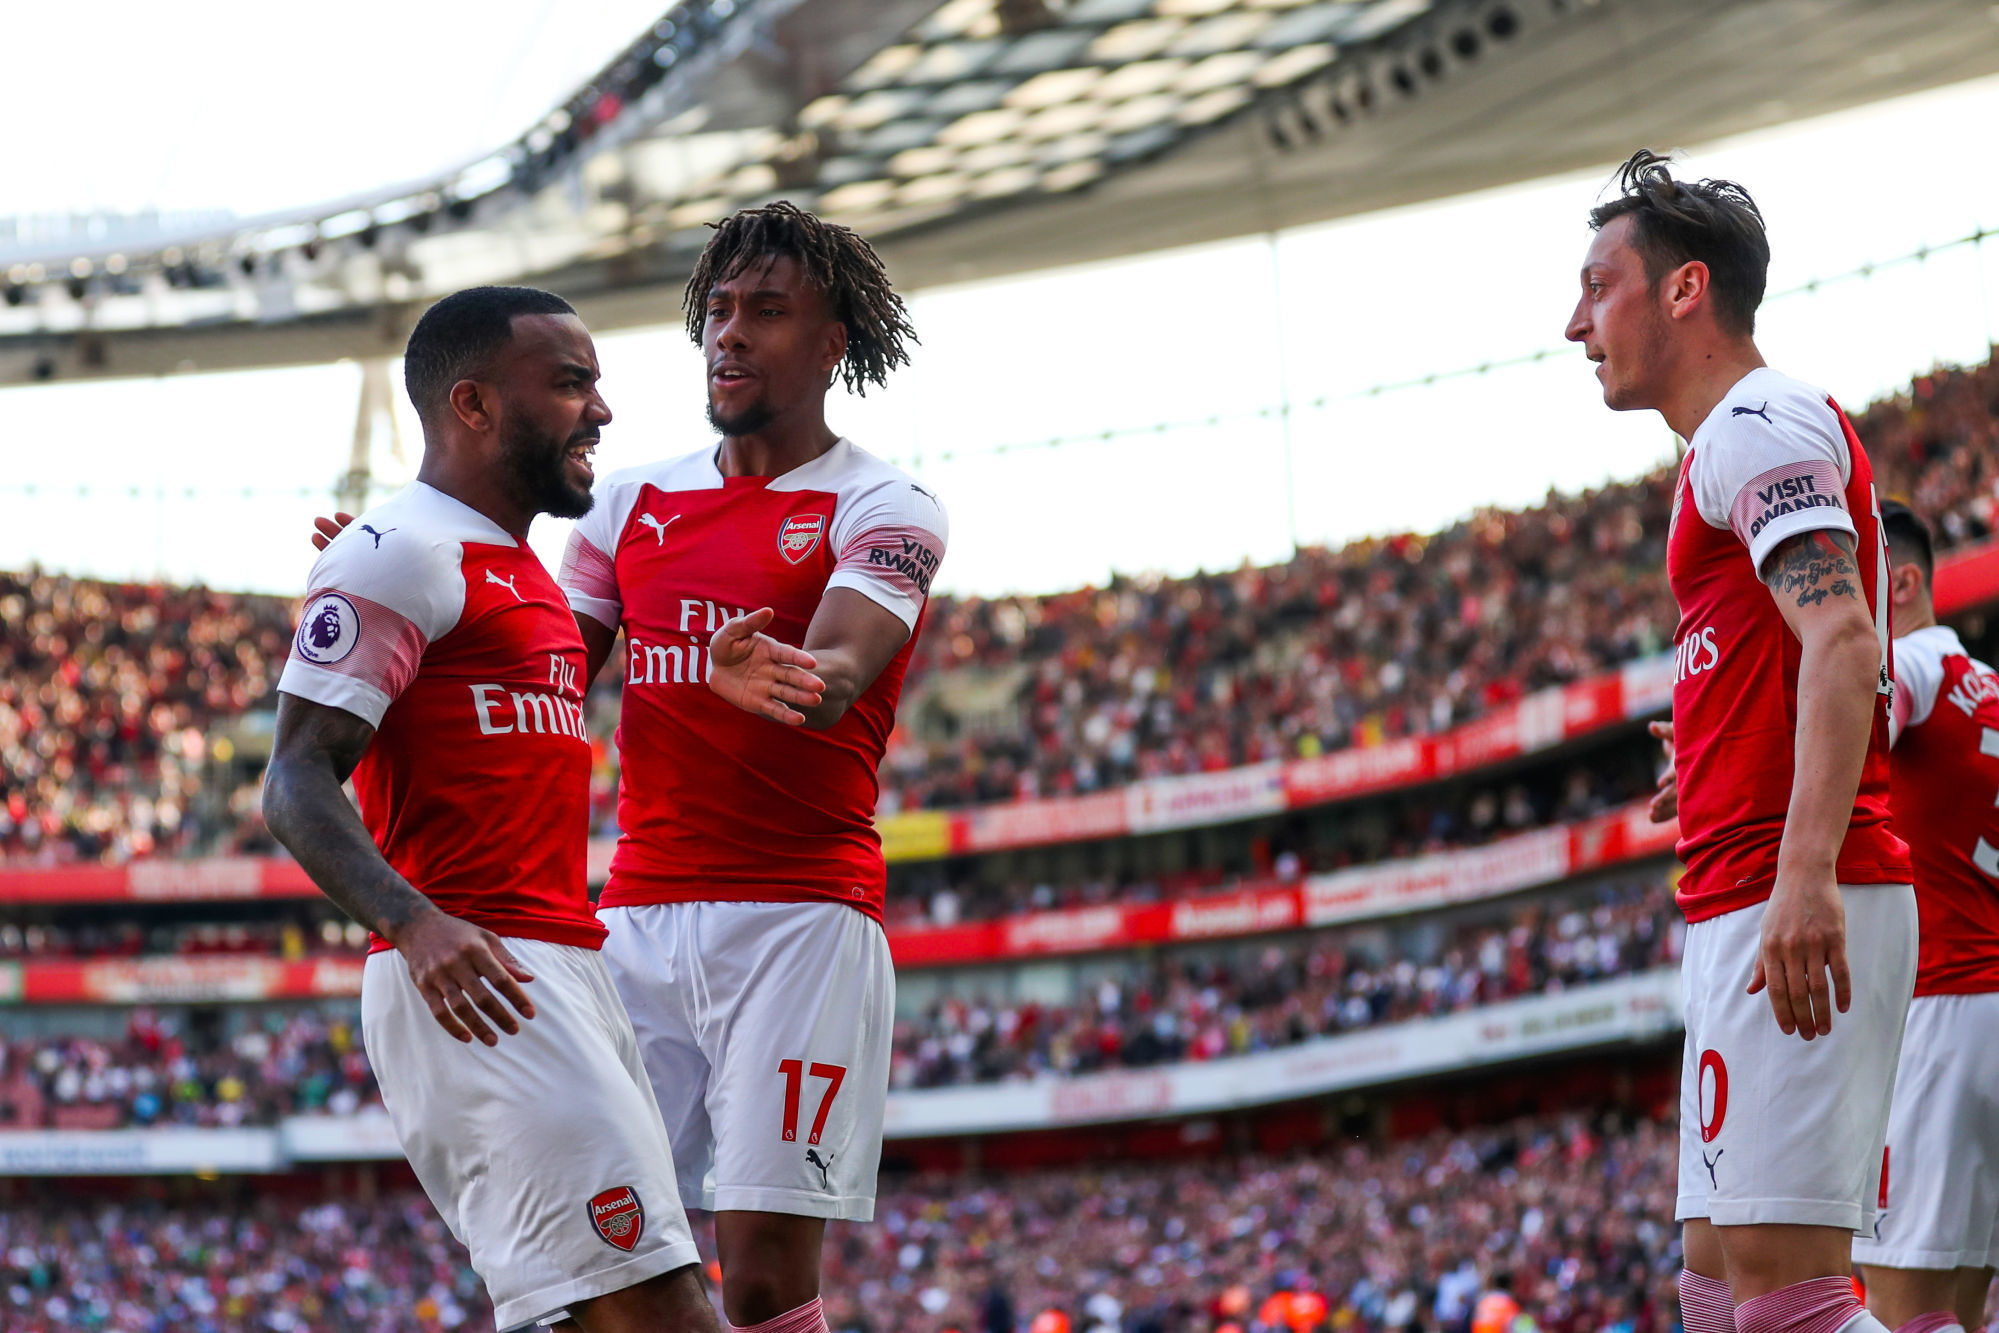 Arsenal's Mesut Ozil (right) celebrates scoring his side's first goal of the game with team mates Arsenal's Alexandre Lacazette and Arsenal's Alex Iwobi during the Premier League match at The Emirates Stadium, London on 21th April 2019 Photo : PA Images / Icon Sport